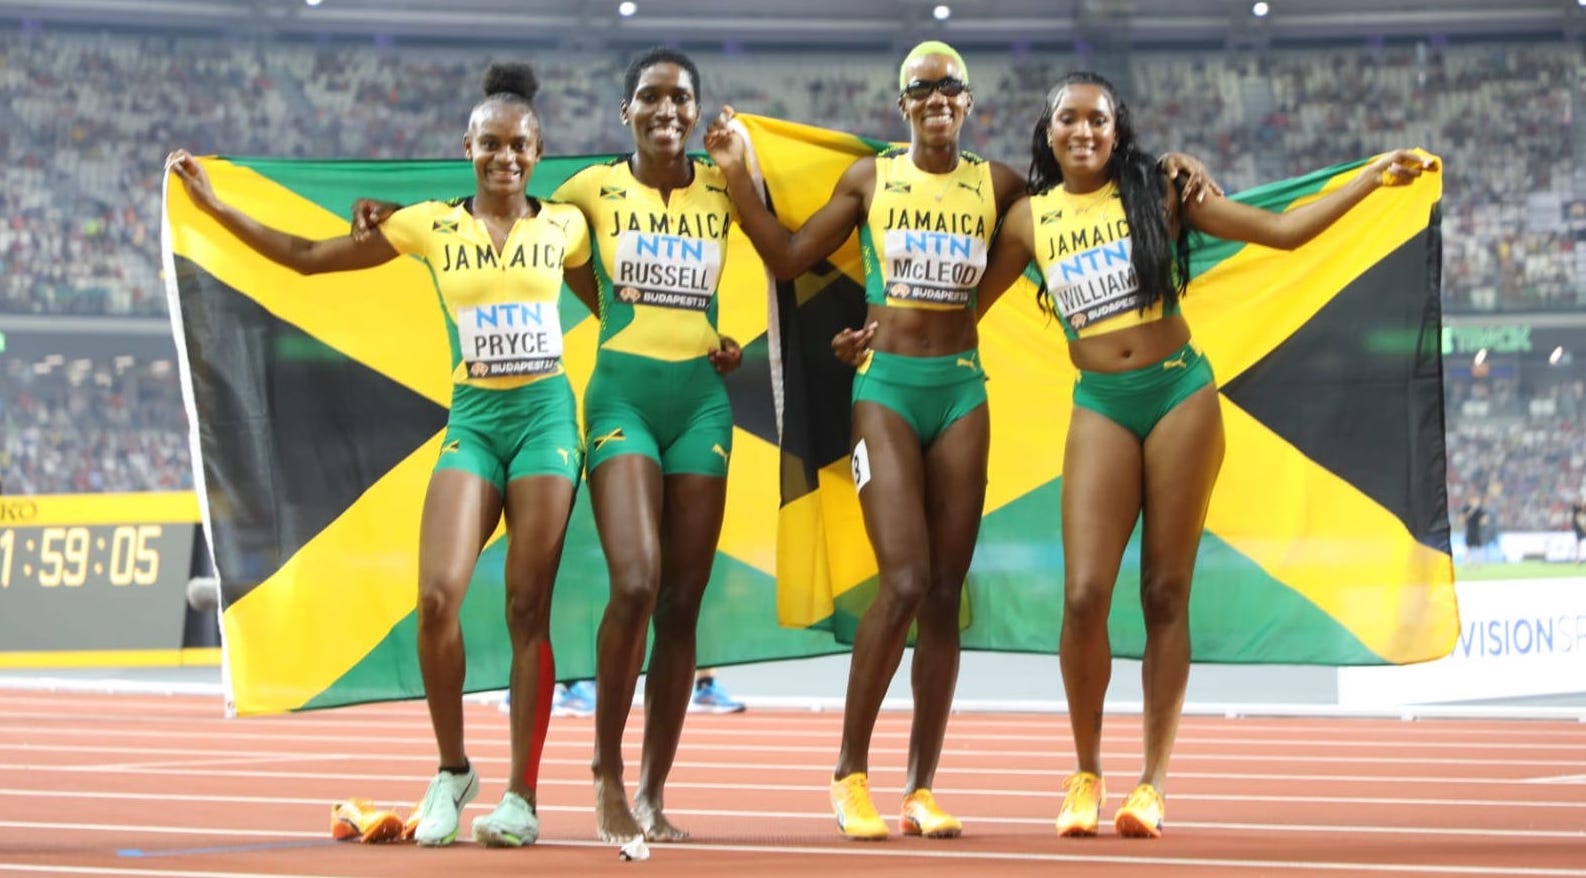 Jamaica women's 4x400m team after finishing 2nd in the Budapest 2023 World Athletics Championships